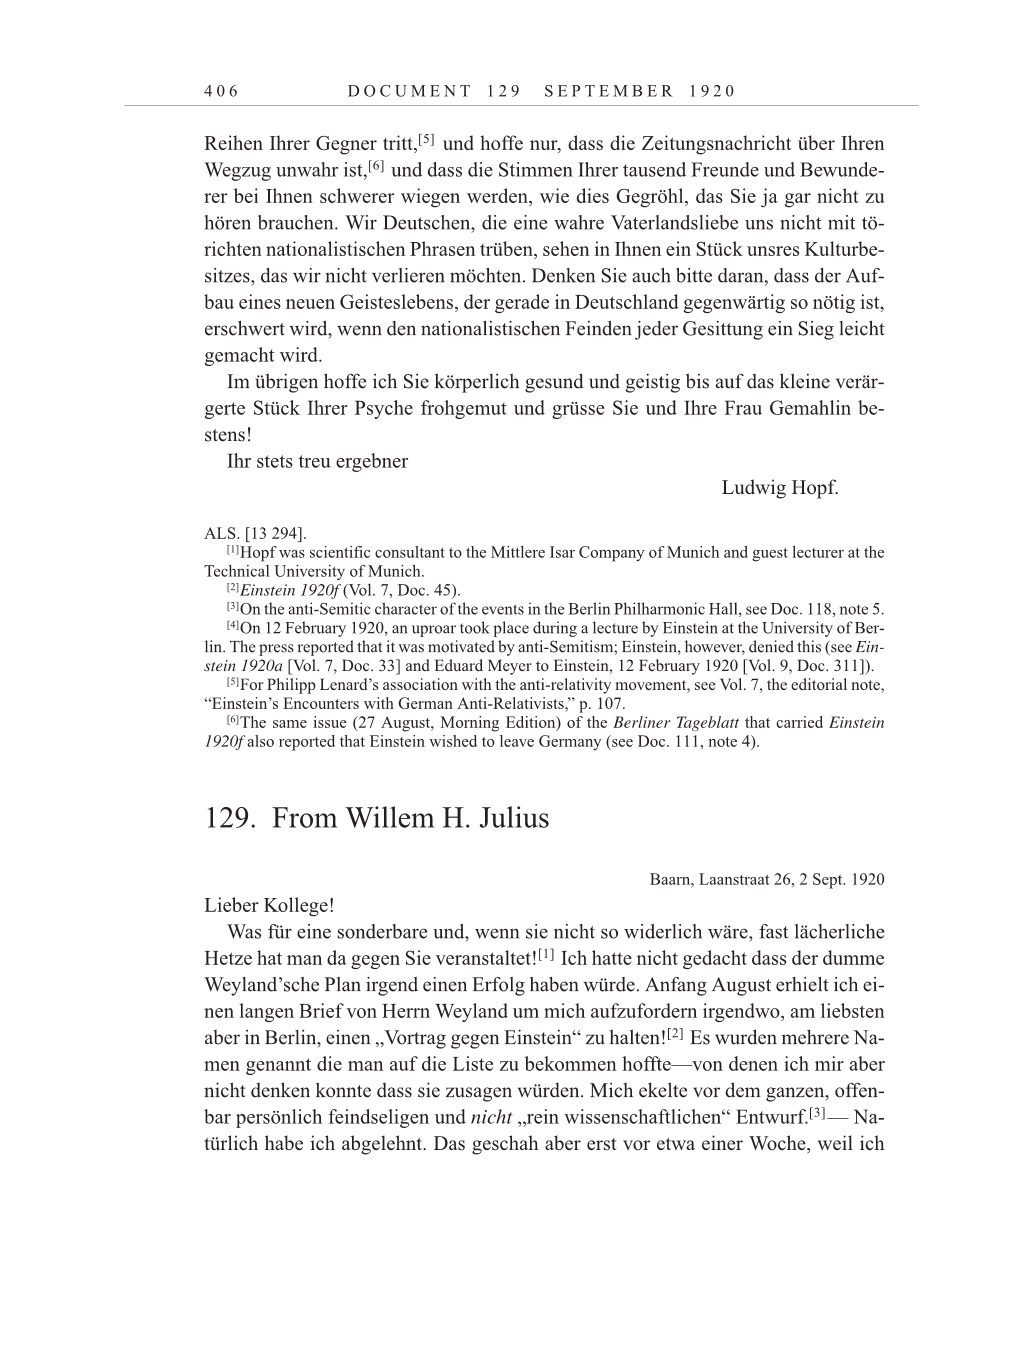 Volume 10: The Berlin Years: Correspondence May-December 1920 / Supplementary Correspondence 1909-1920 page 406